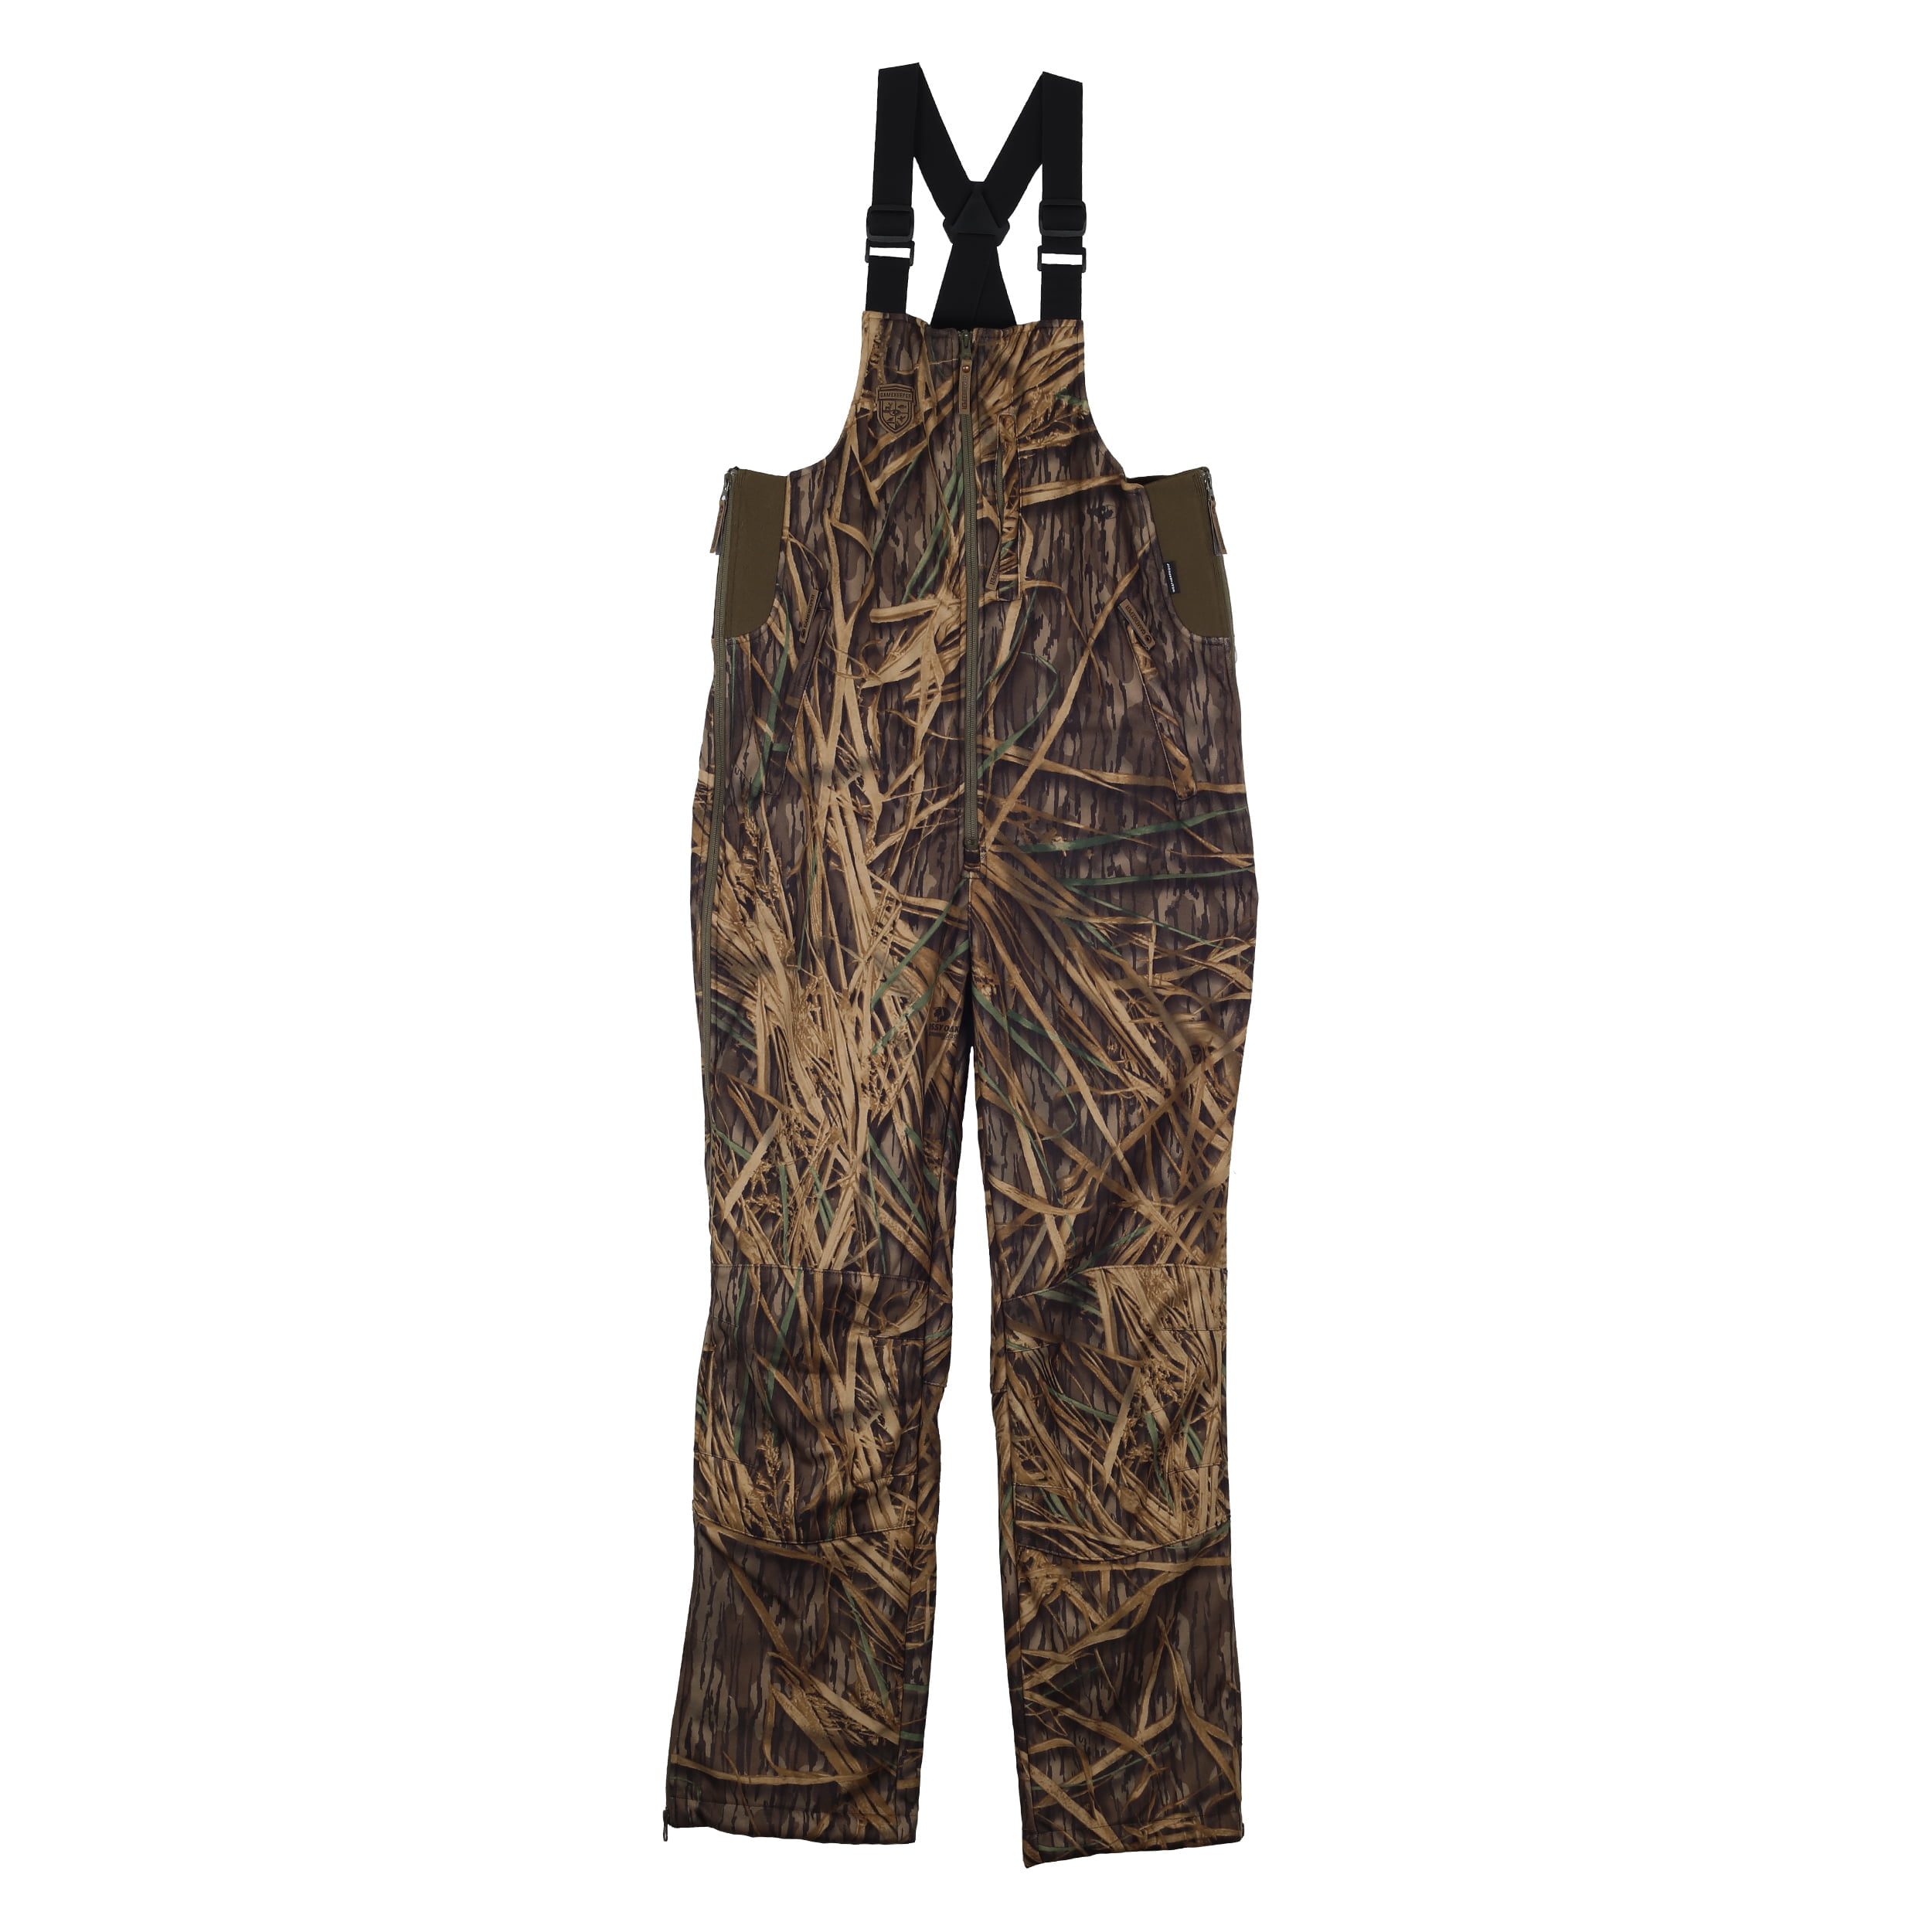 3XL/REALTREE.MAX5 3063127606 Browning Wicked Wing Insulated Bib 3XL 